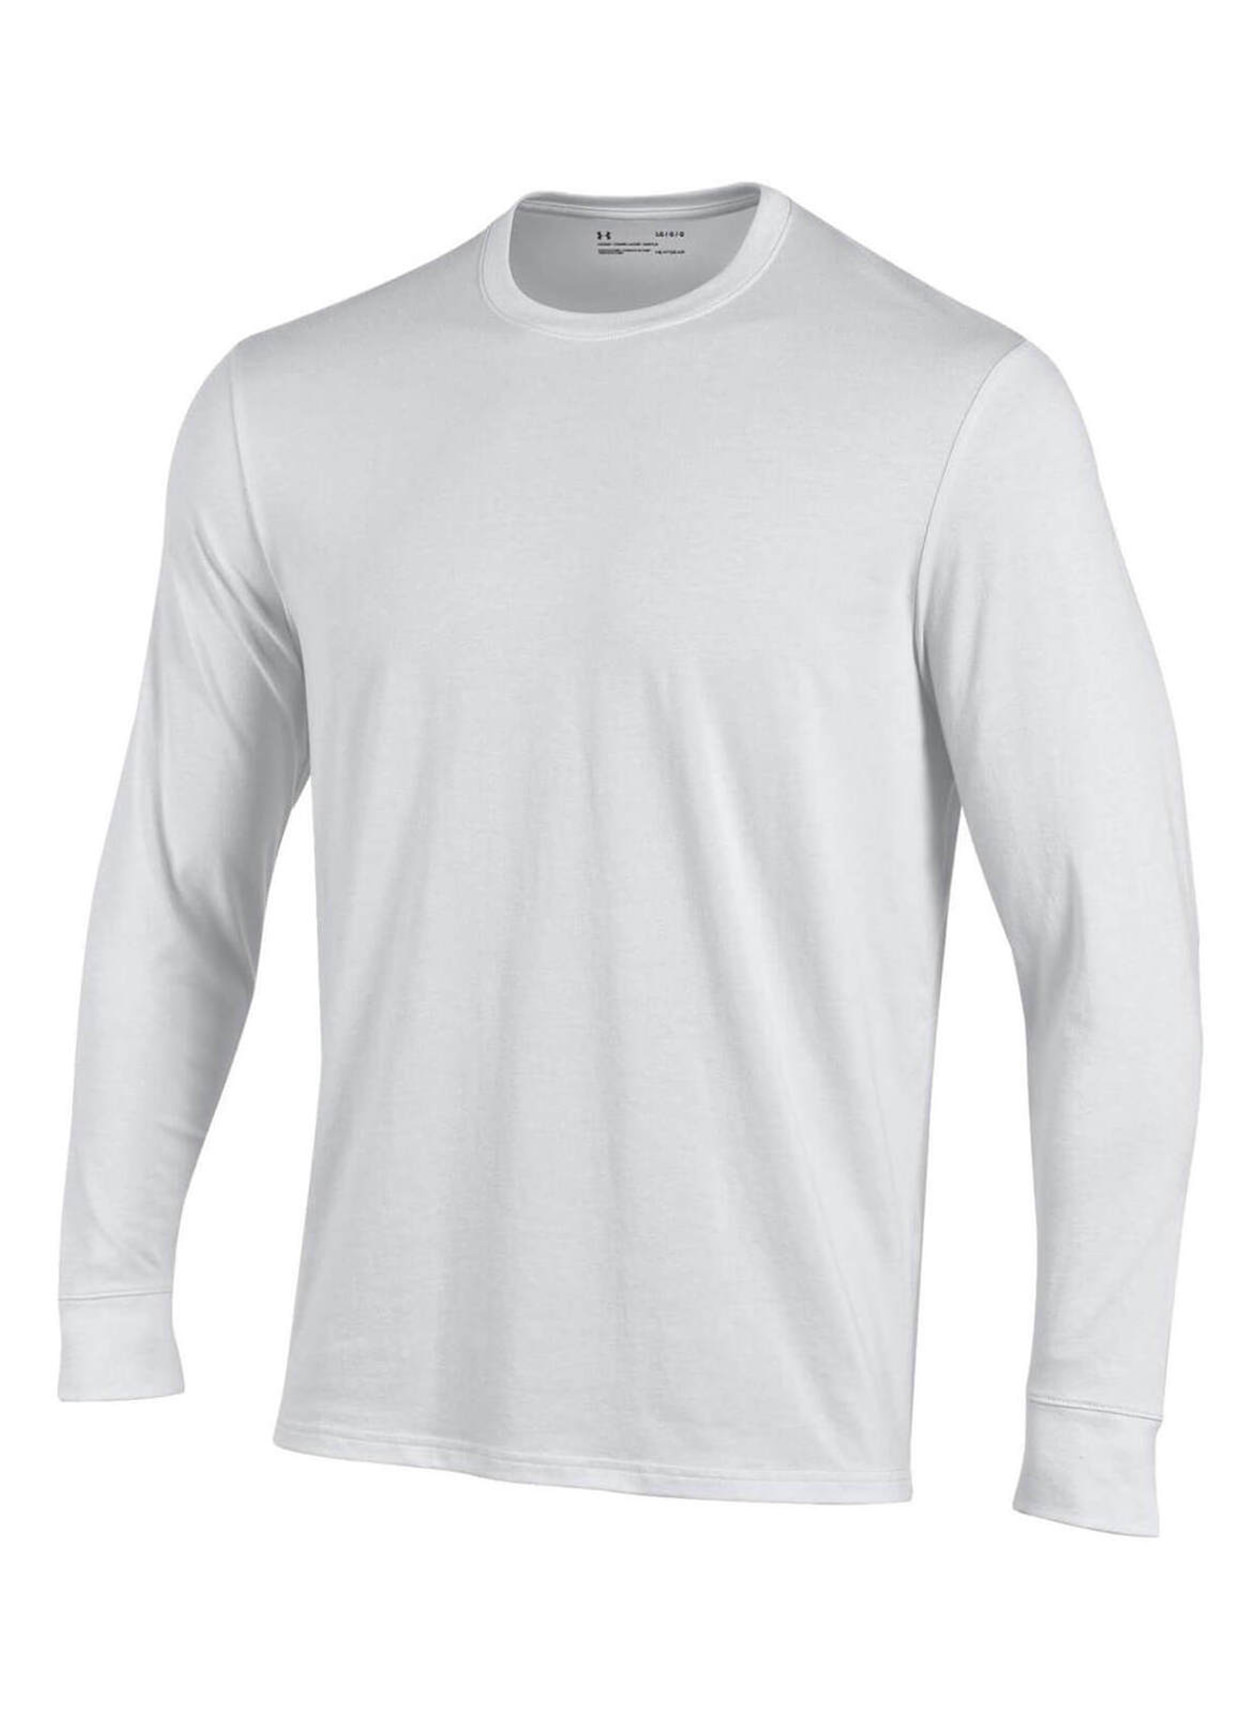 Embroidered Under Armour Men's White Performance Long-Sleeve Cotton T-Shirt